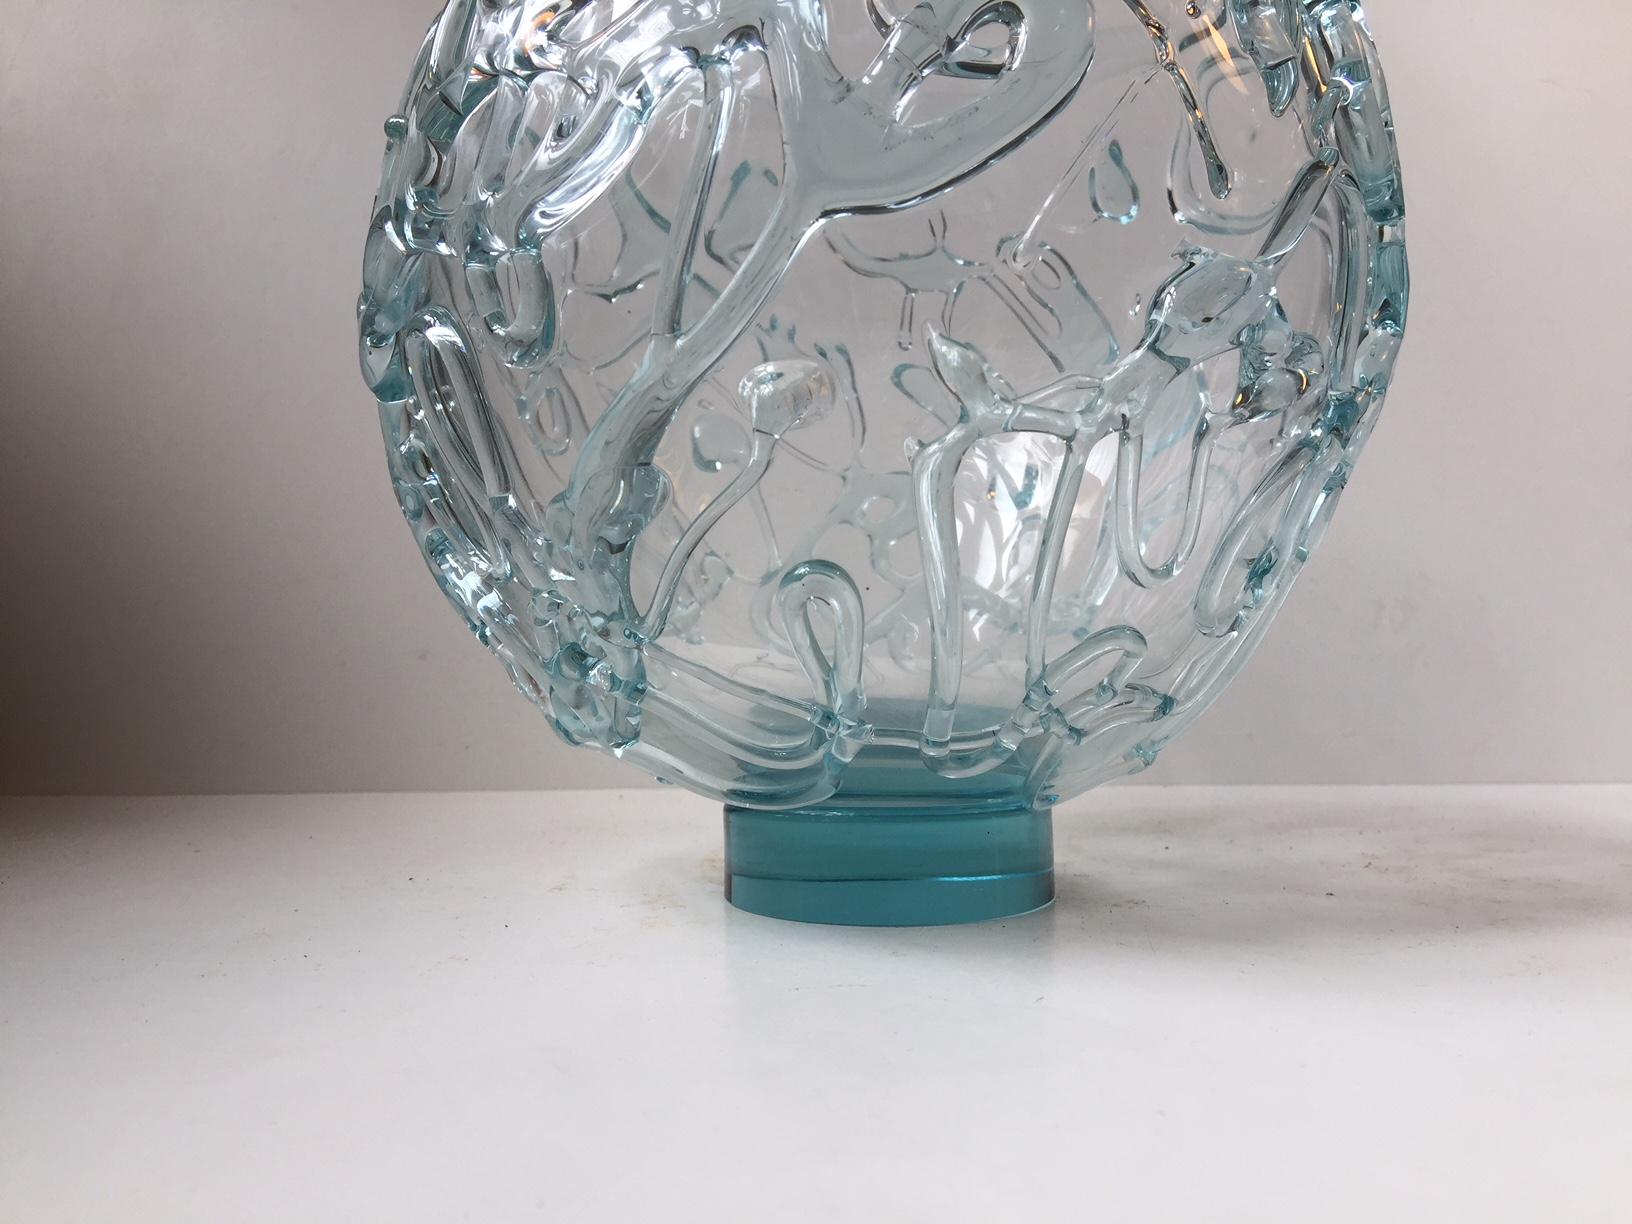 Large circular vase in light-blue toned clear art glass. Its an unique piece and its signed by the artist, numbered and dated. It is decorated with applied threads of glass creating an abstract motif around the entire perimeter of the vase. Some of